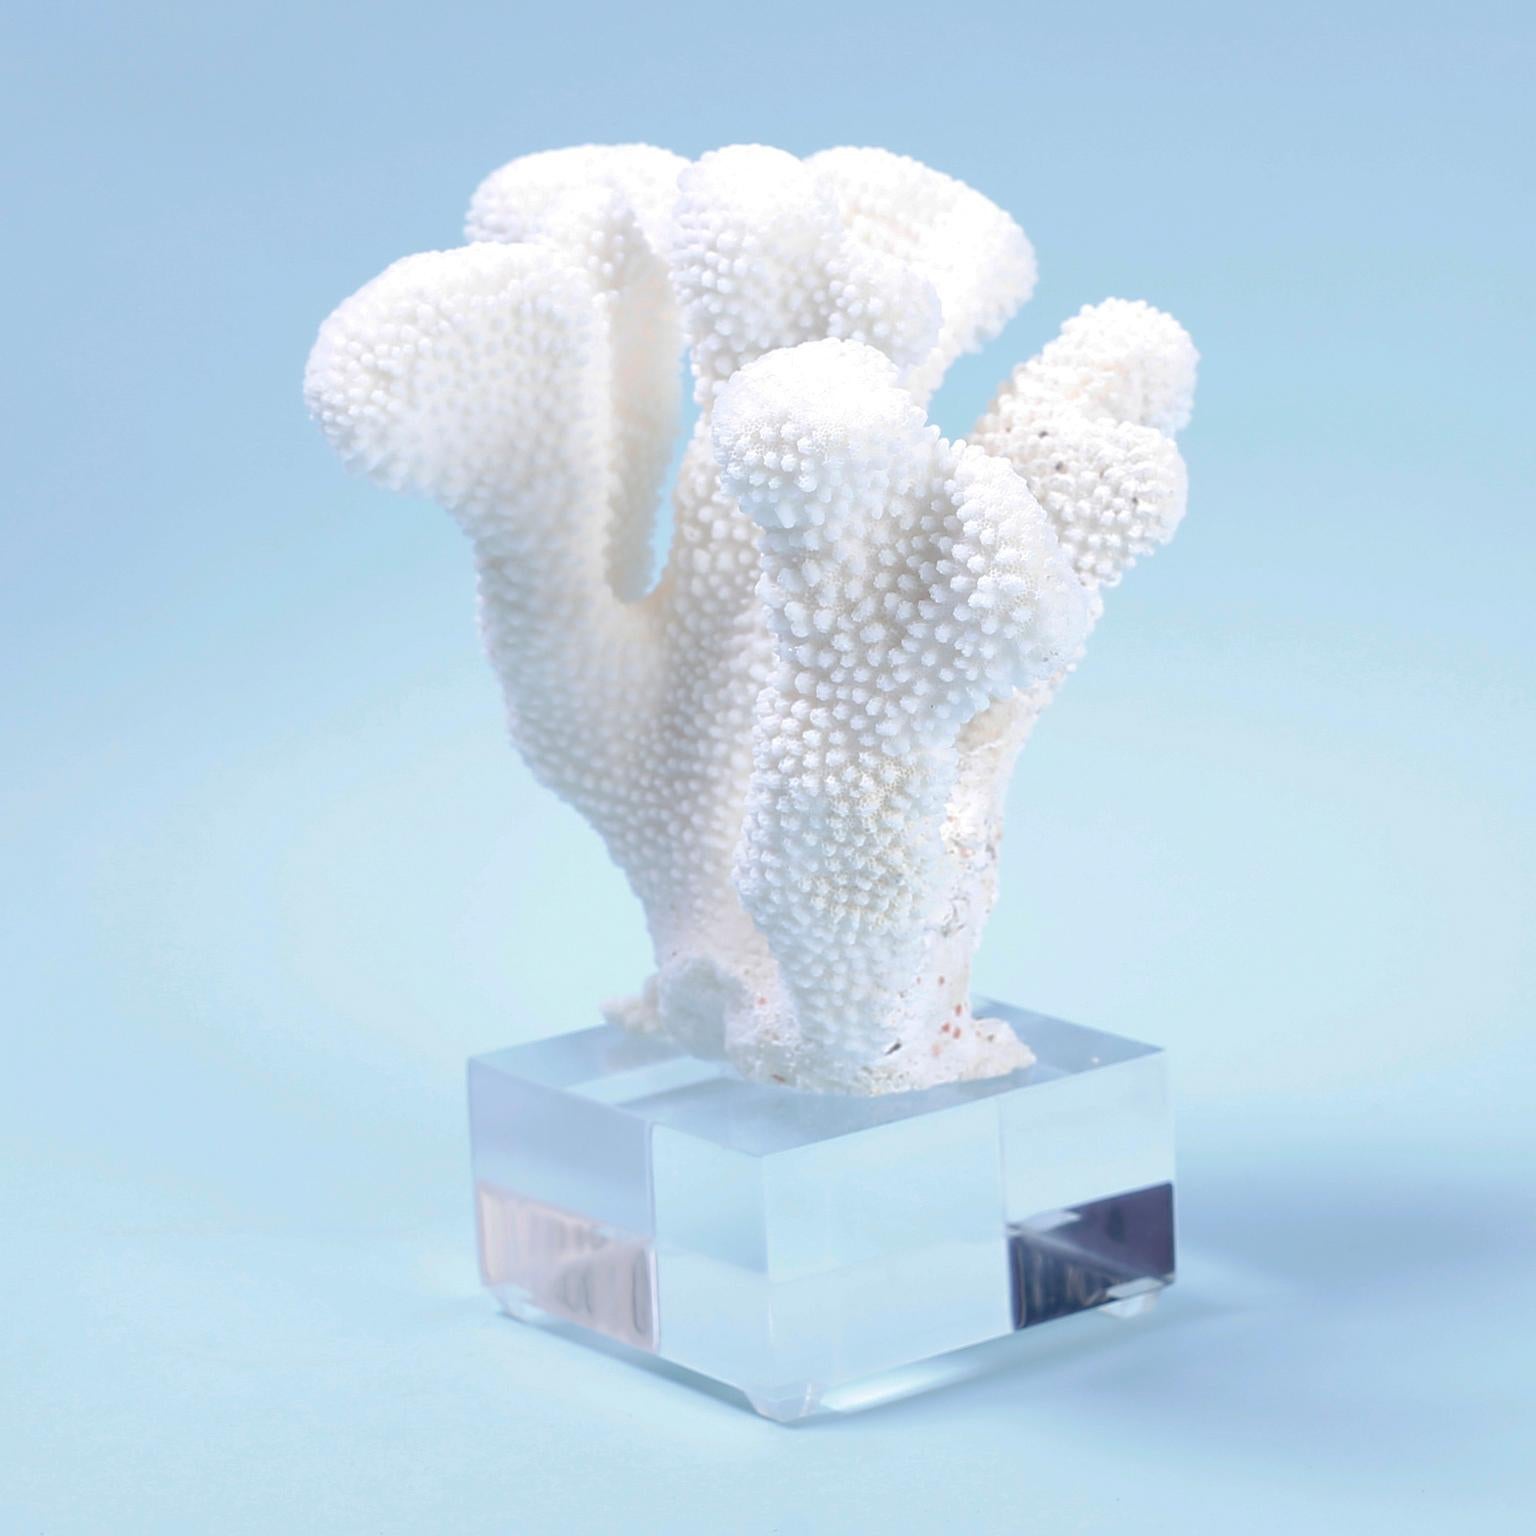 Solomon Islands Two White Coral Specimens on Lucite, Priced Individually